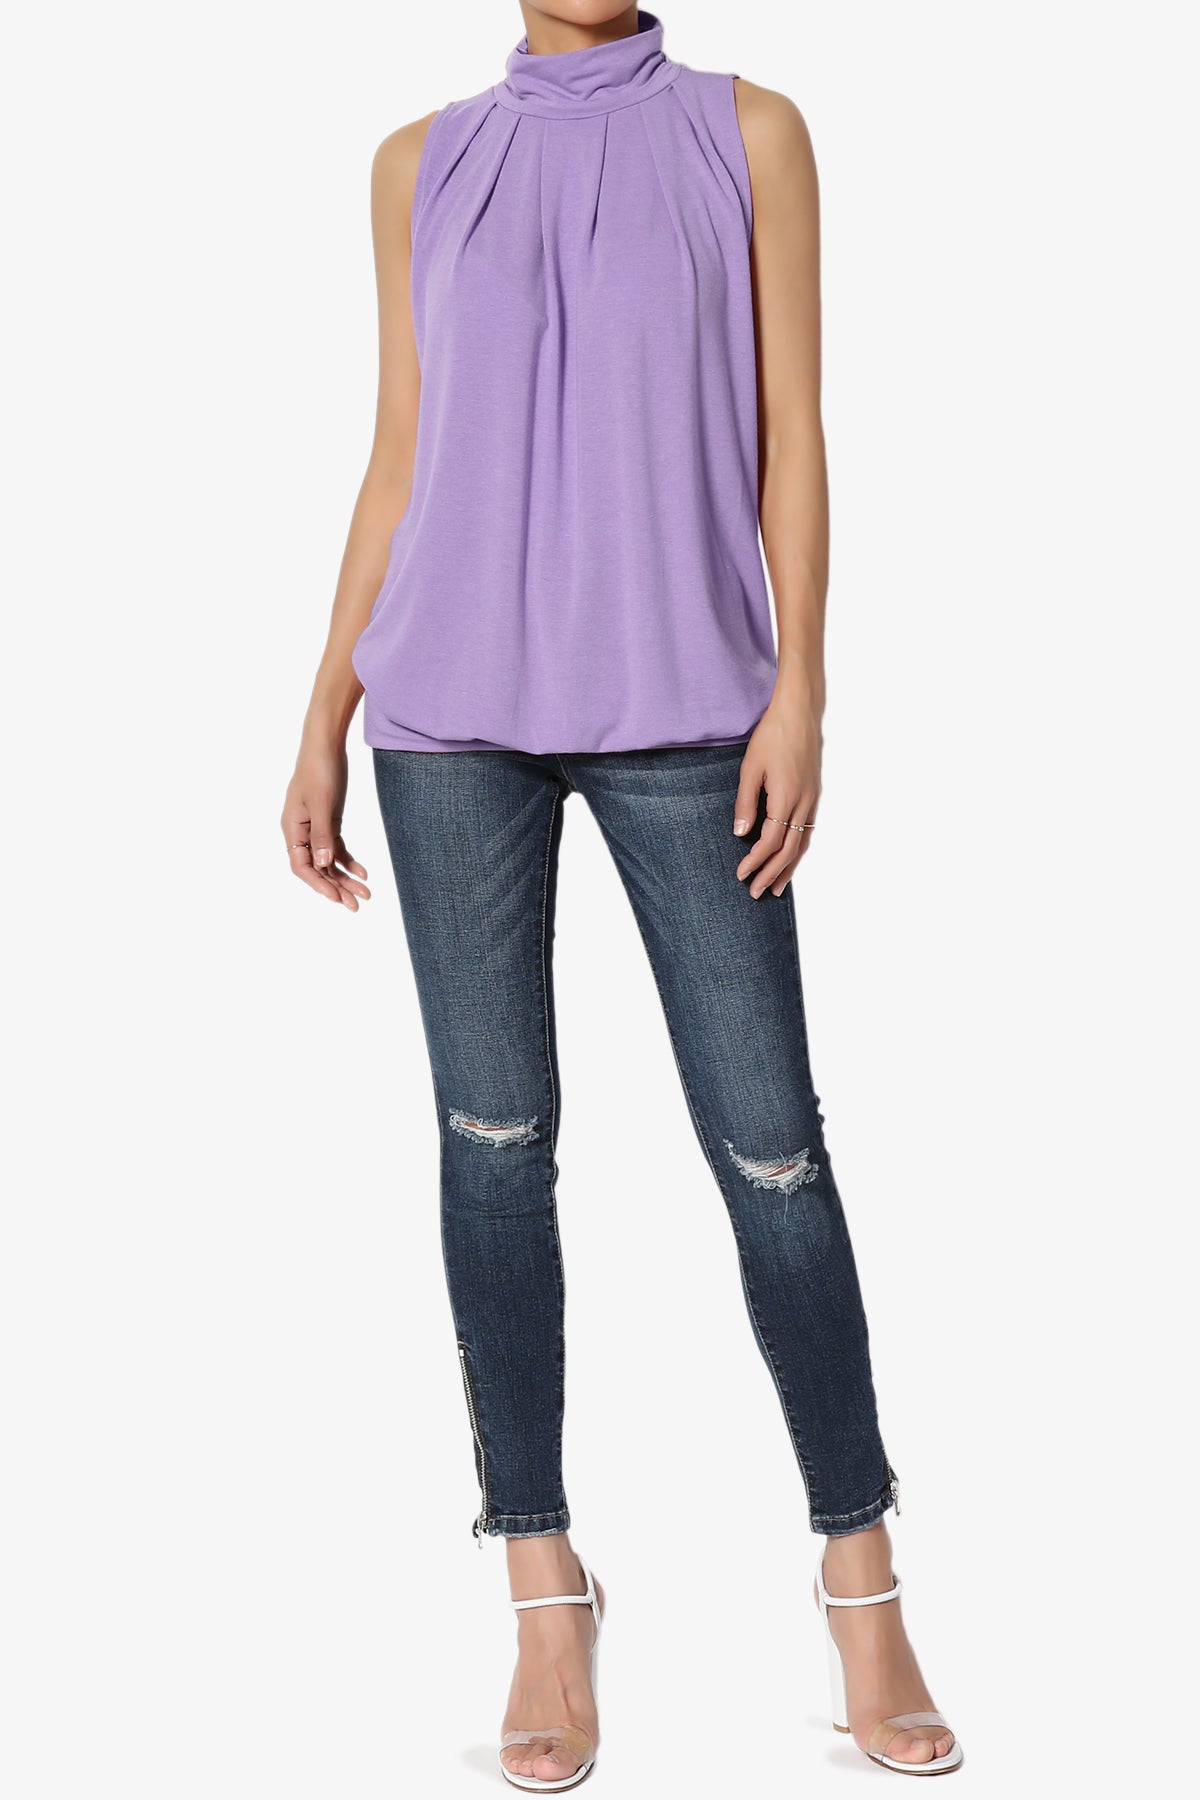 Load image into Gallery viewer, Jibbitz Sleeveless Mock Neck Pleated Top LAVENDER_6
